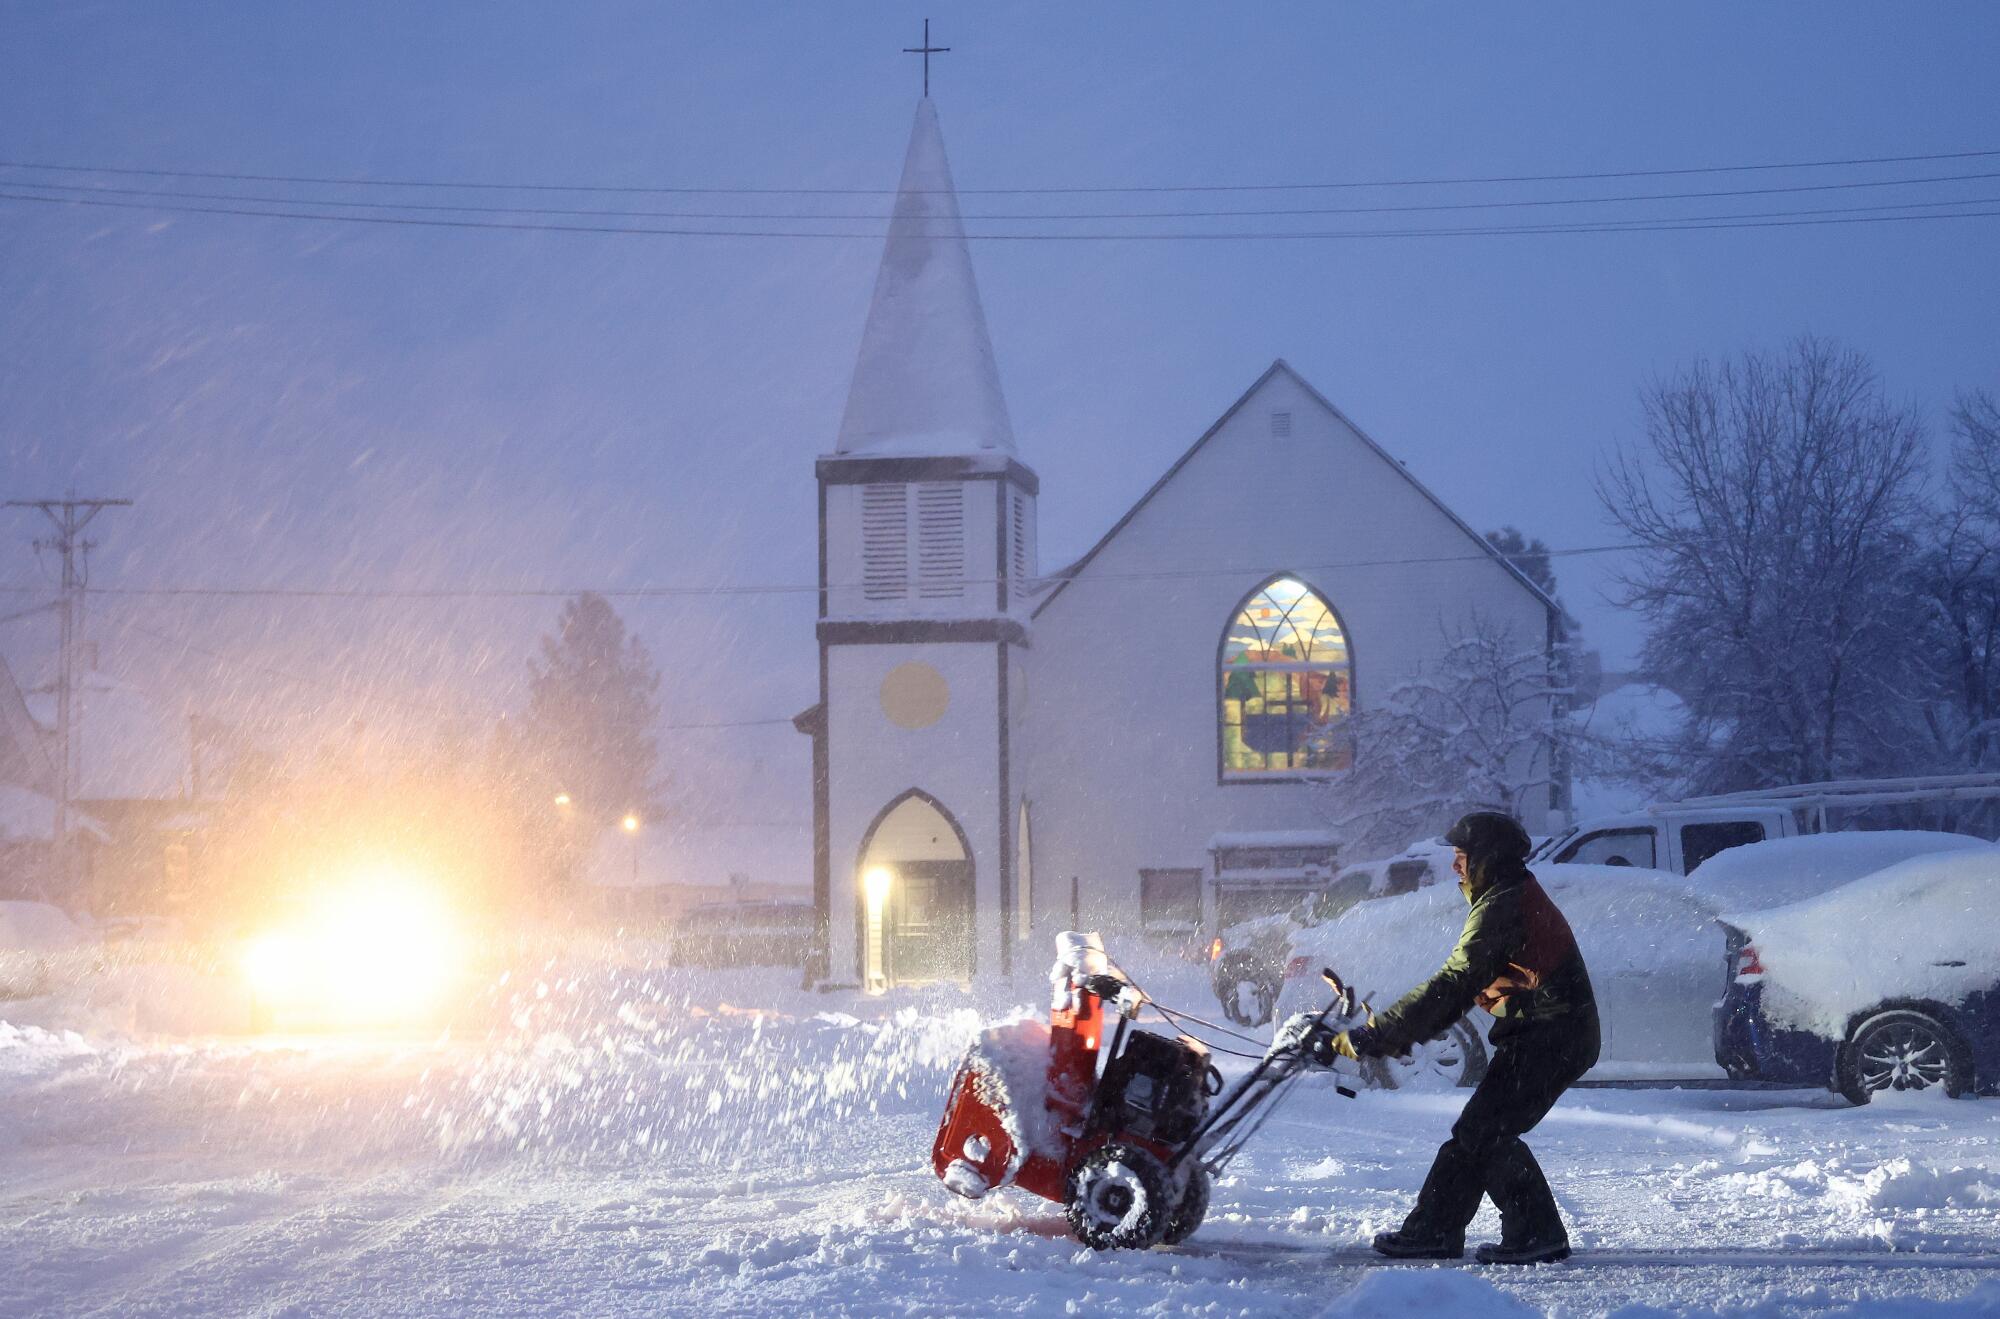 Michael Murray uses a snowplow in the dark during a heavy snowfall in front of a church.